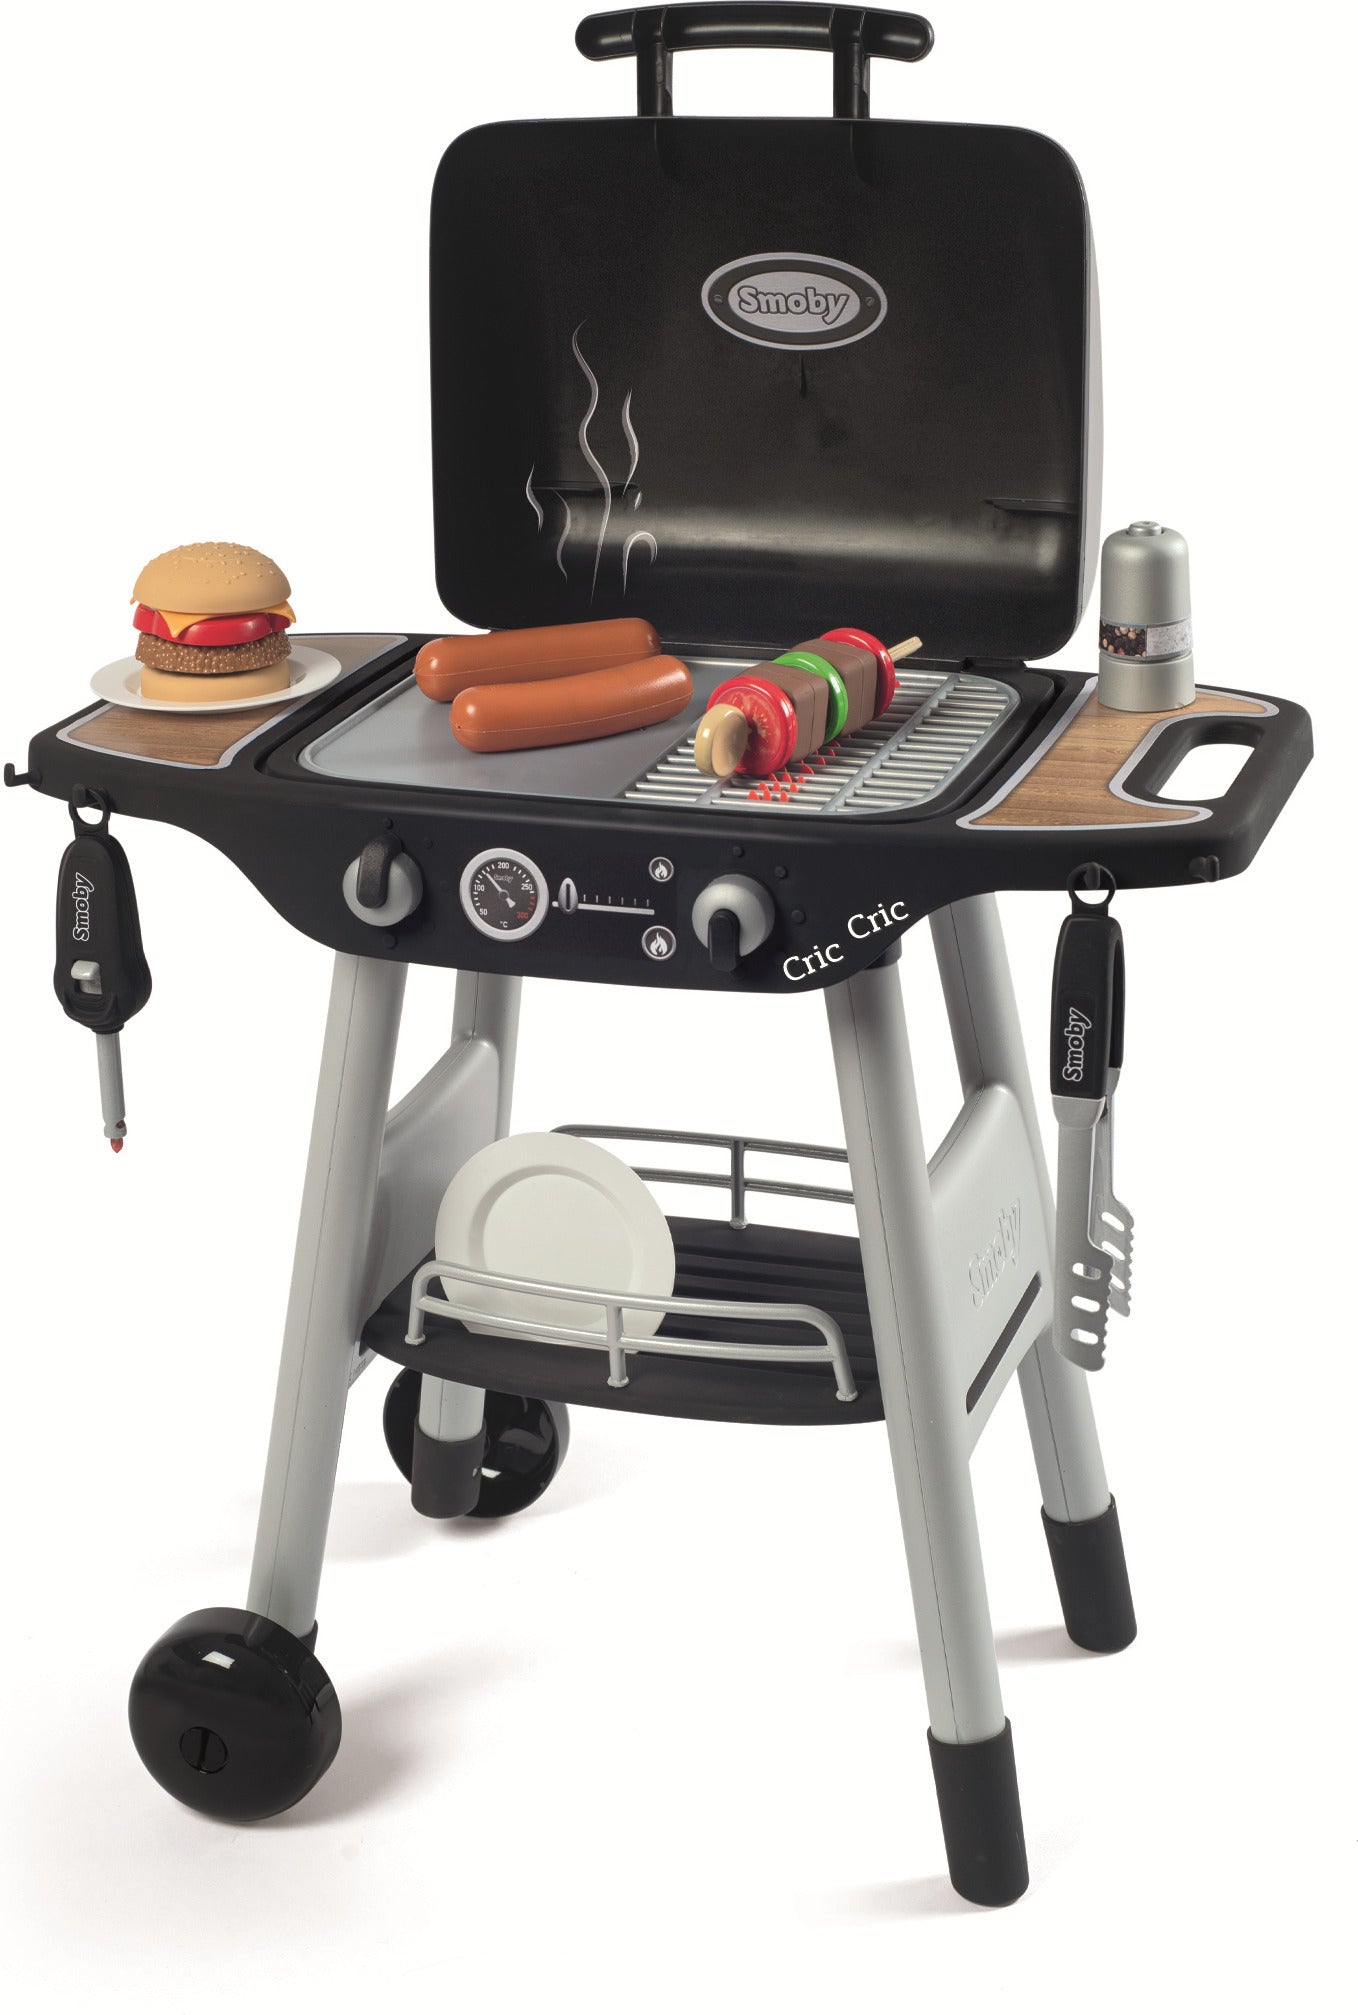 Smoby BBQ Toy Grill